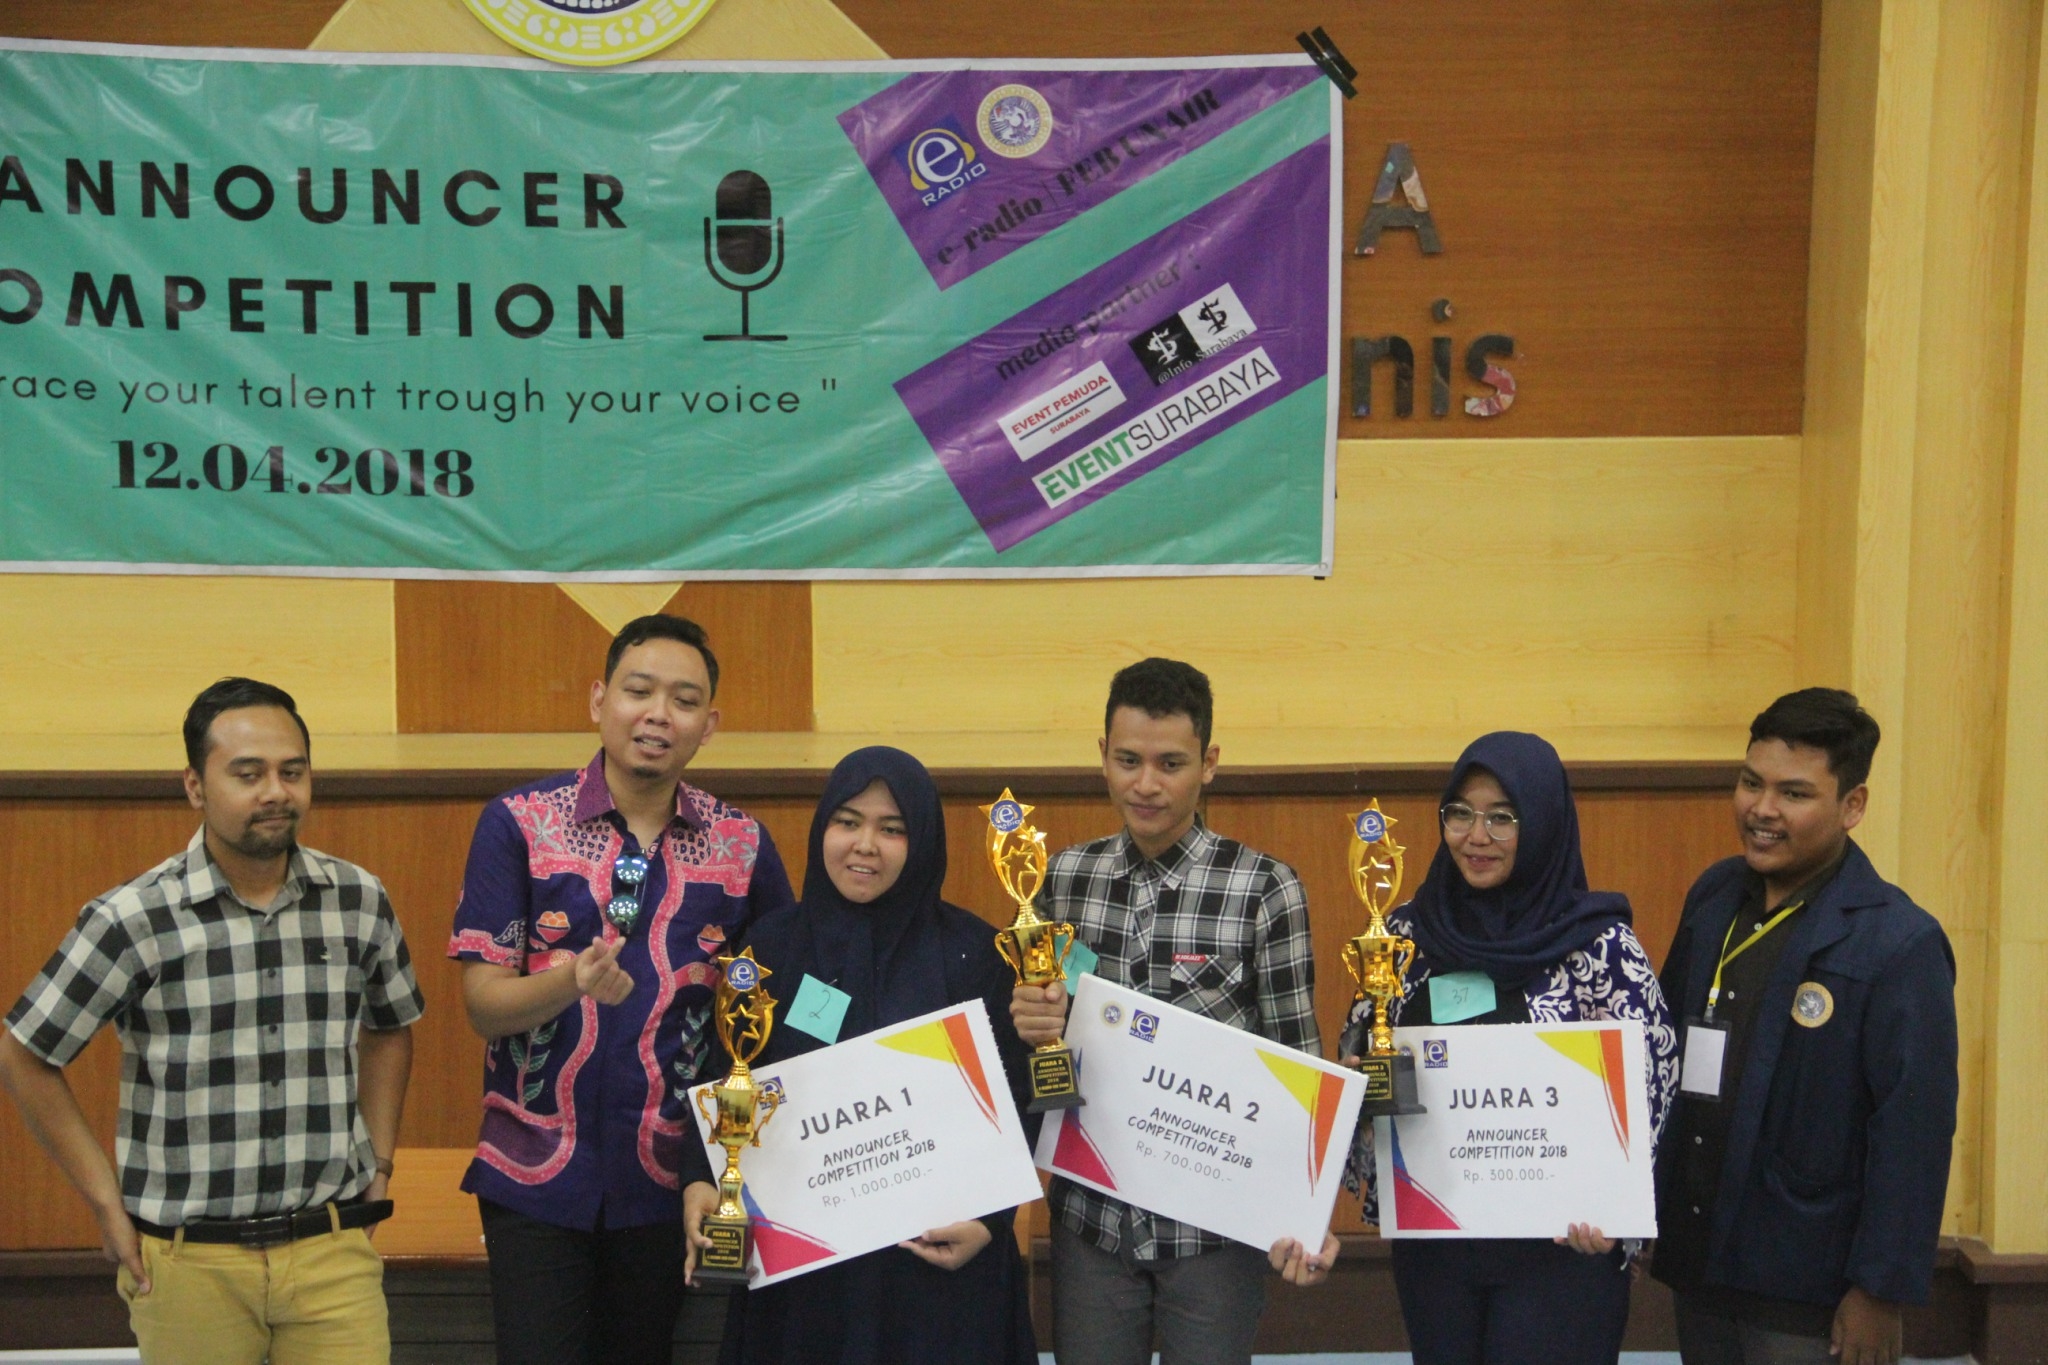 Announcer Competition 2018